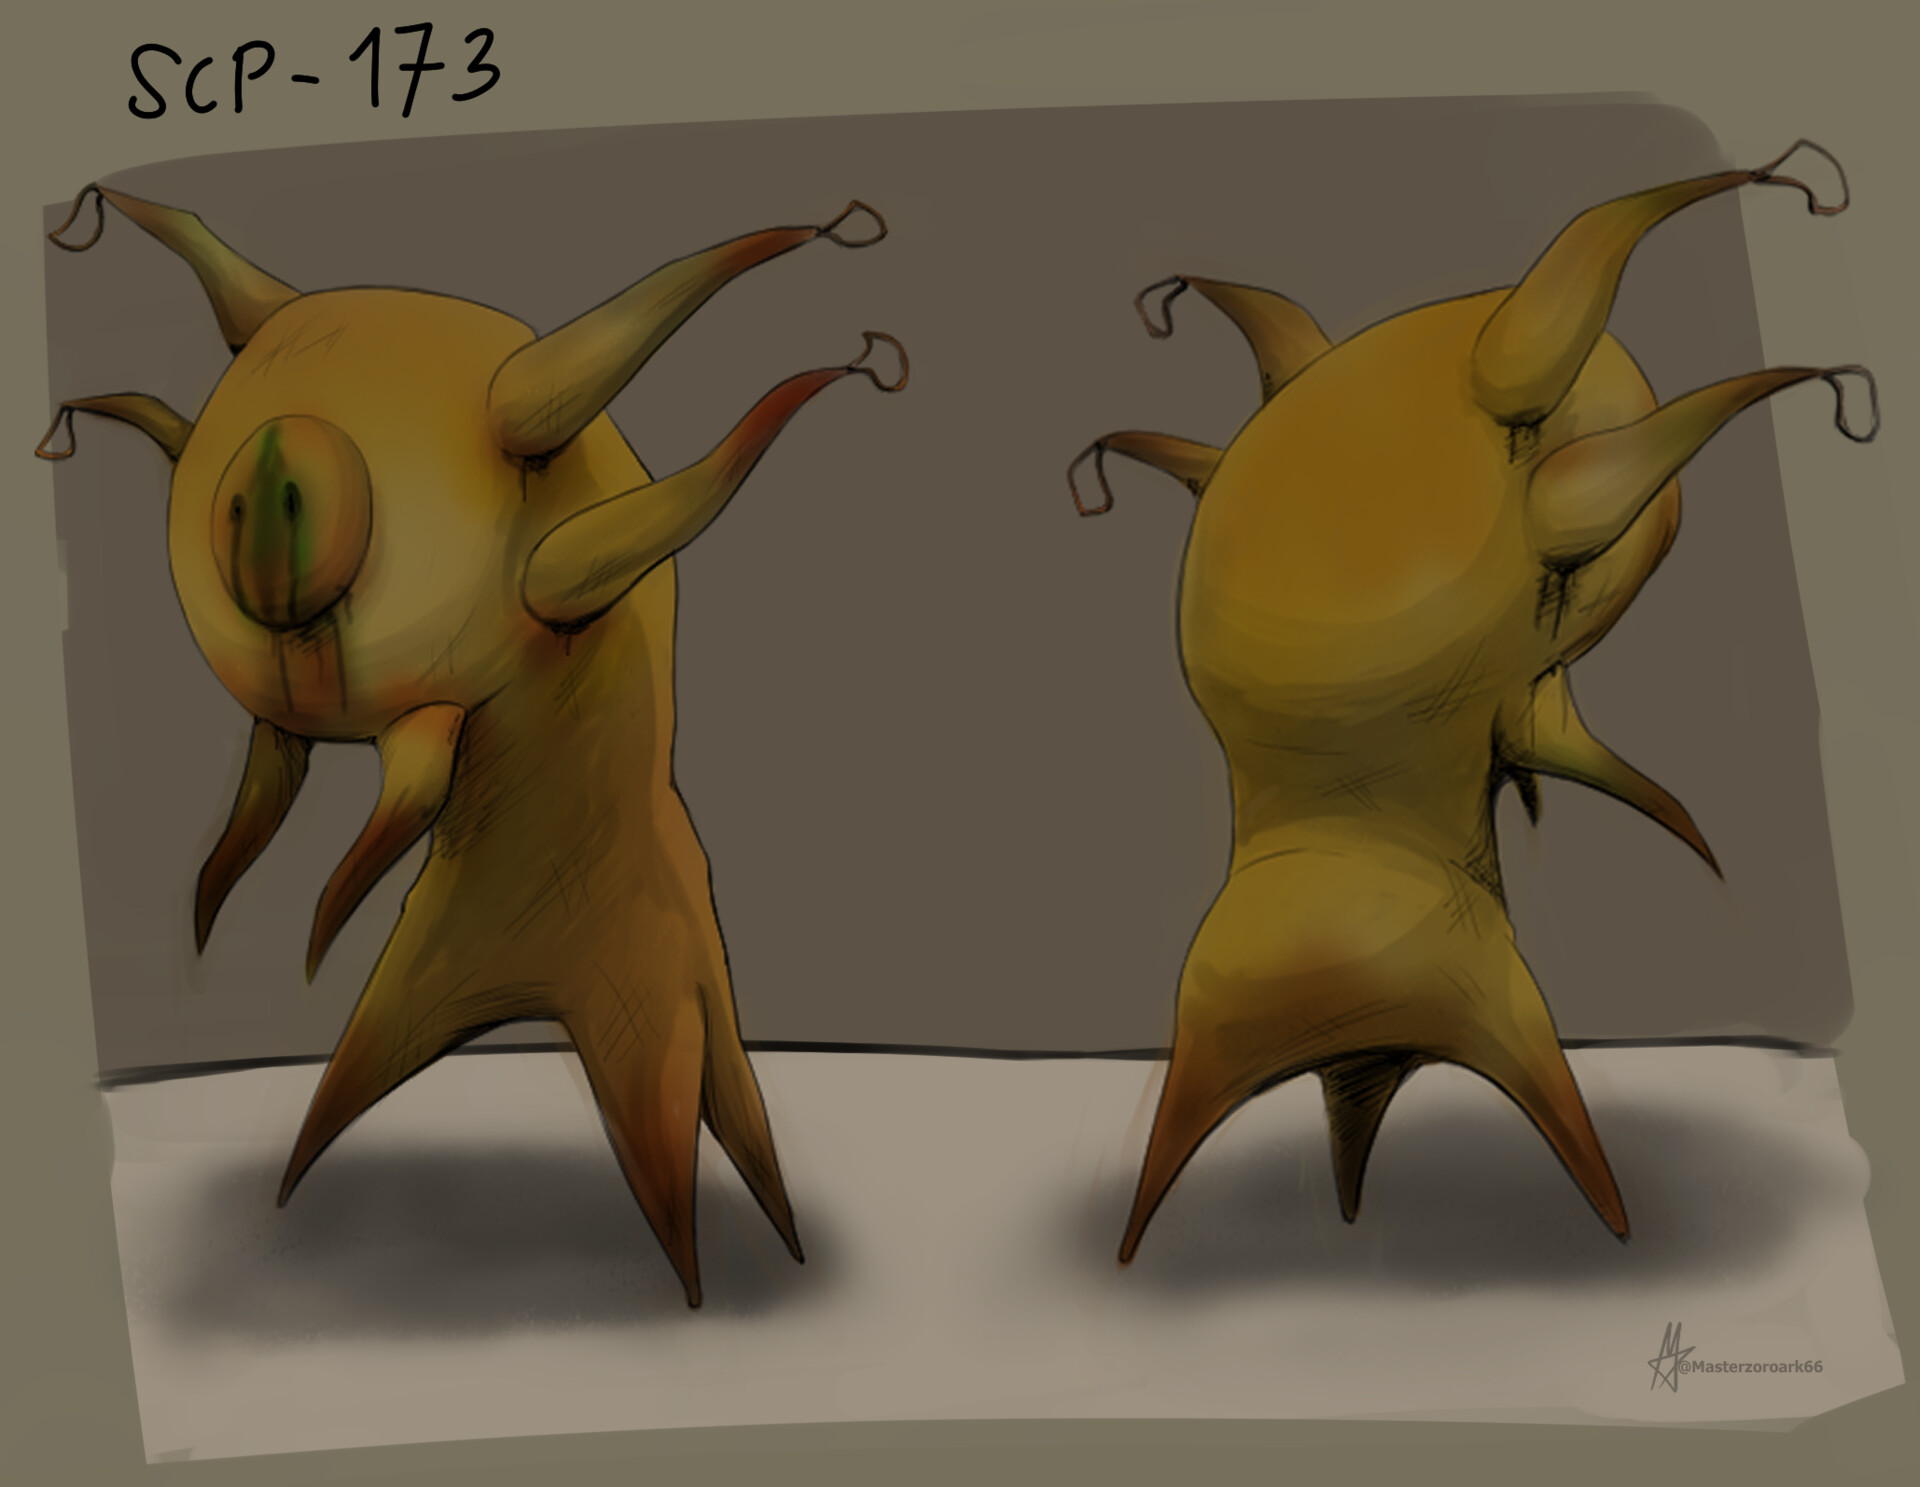 A redesign of SCP-173 I did recently. 